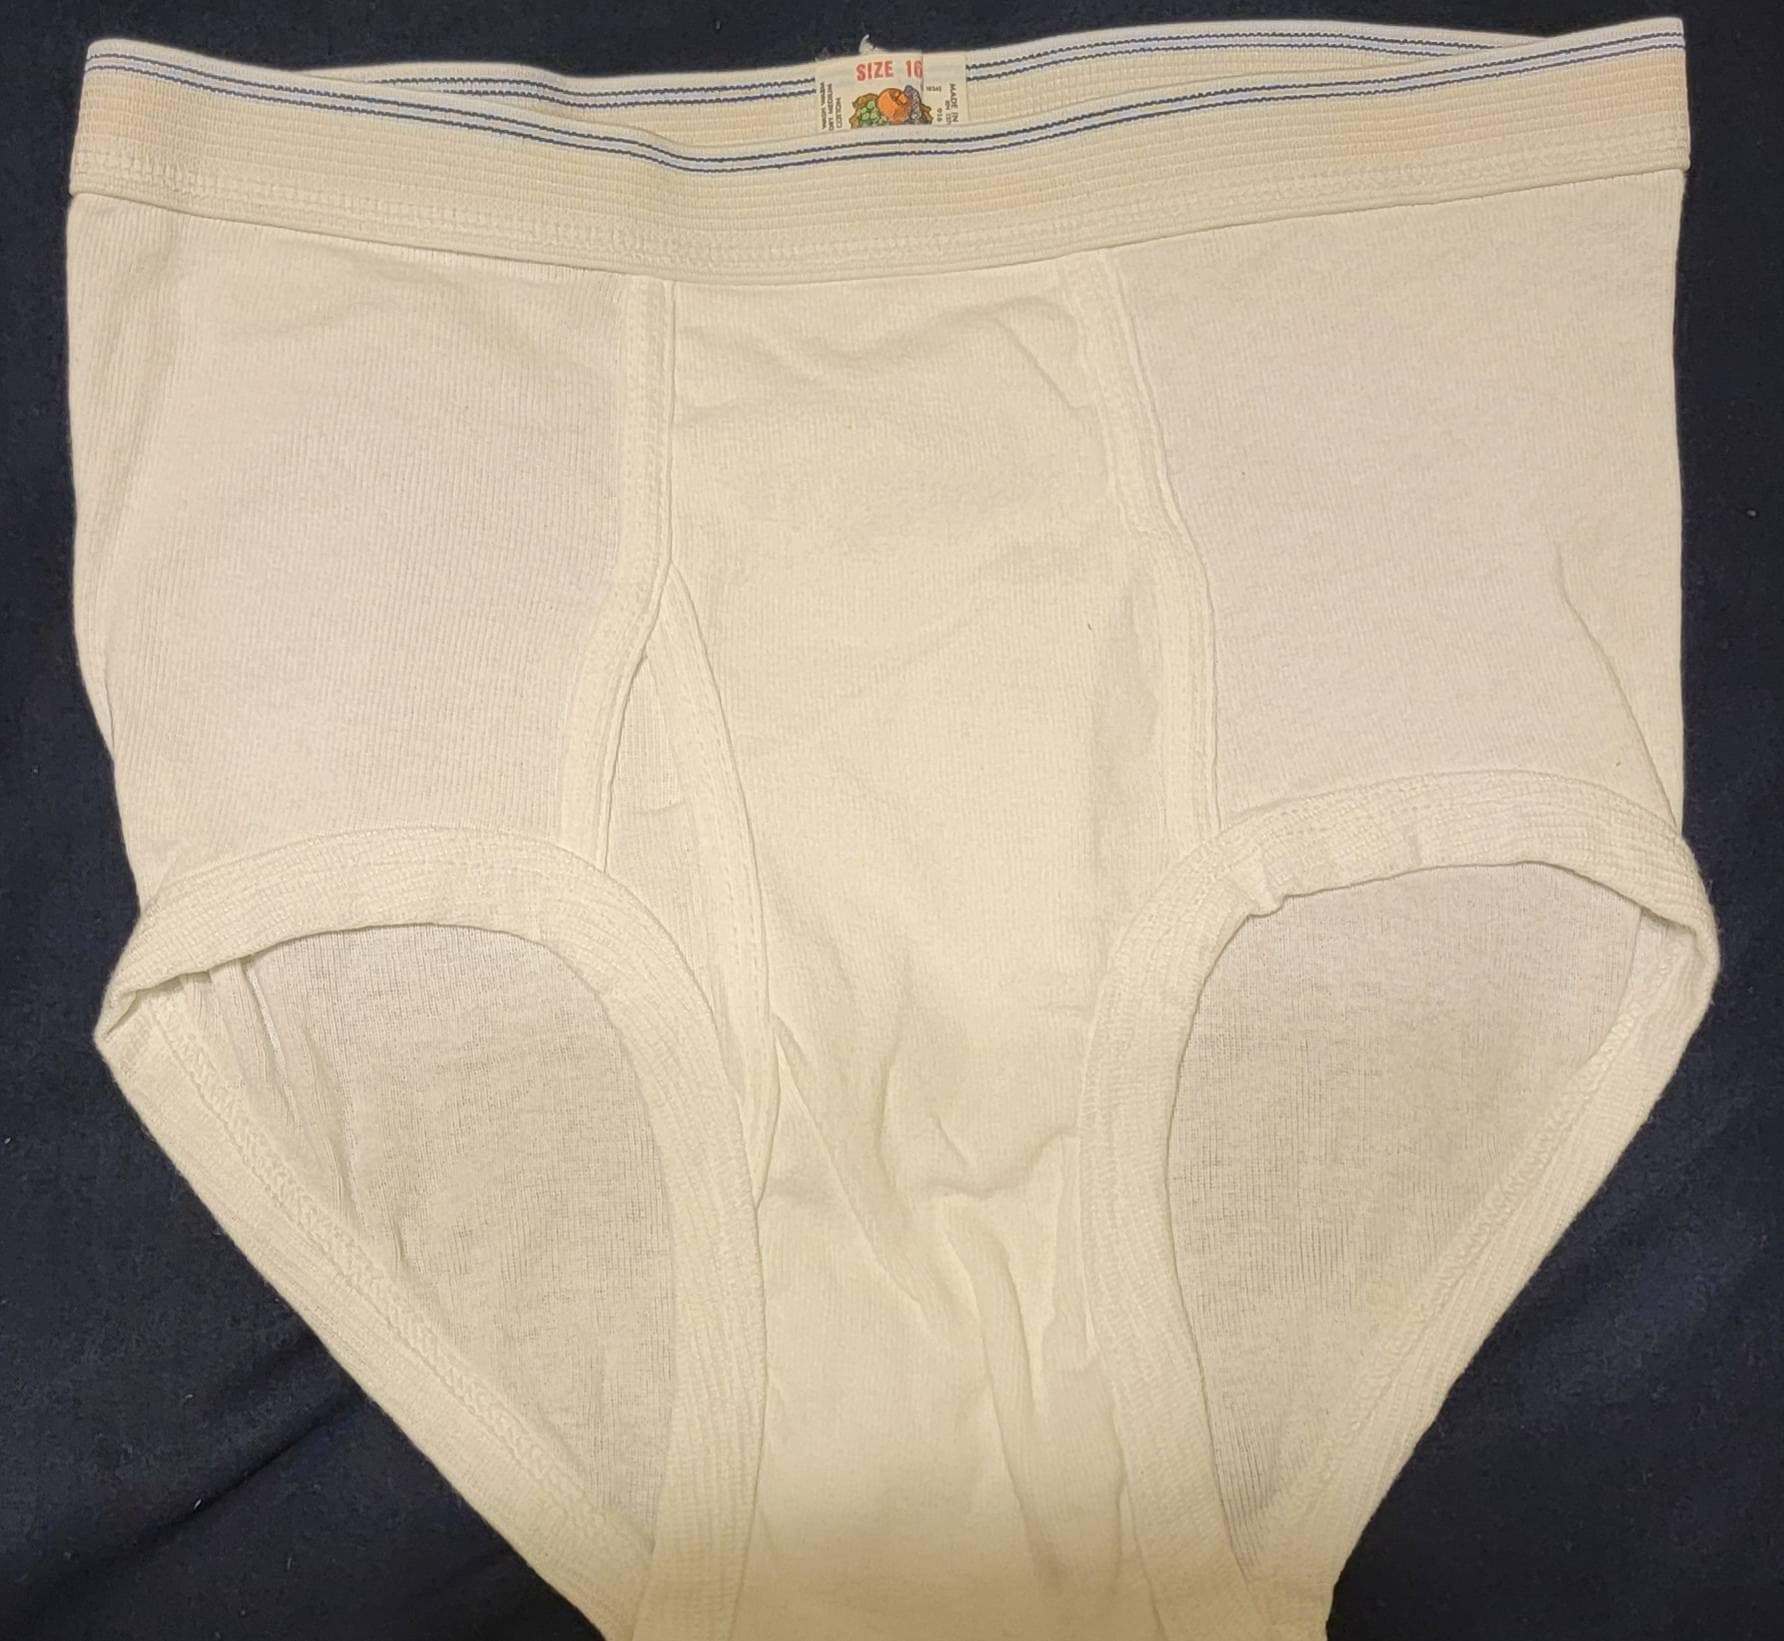 90's Vintage Fruit of the Loom Briefs SIZE 14,16 -  Canada